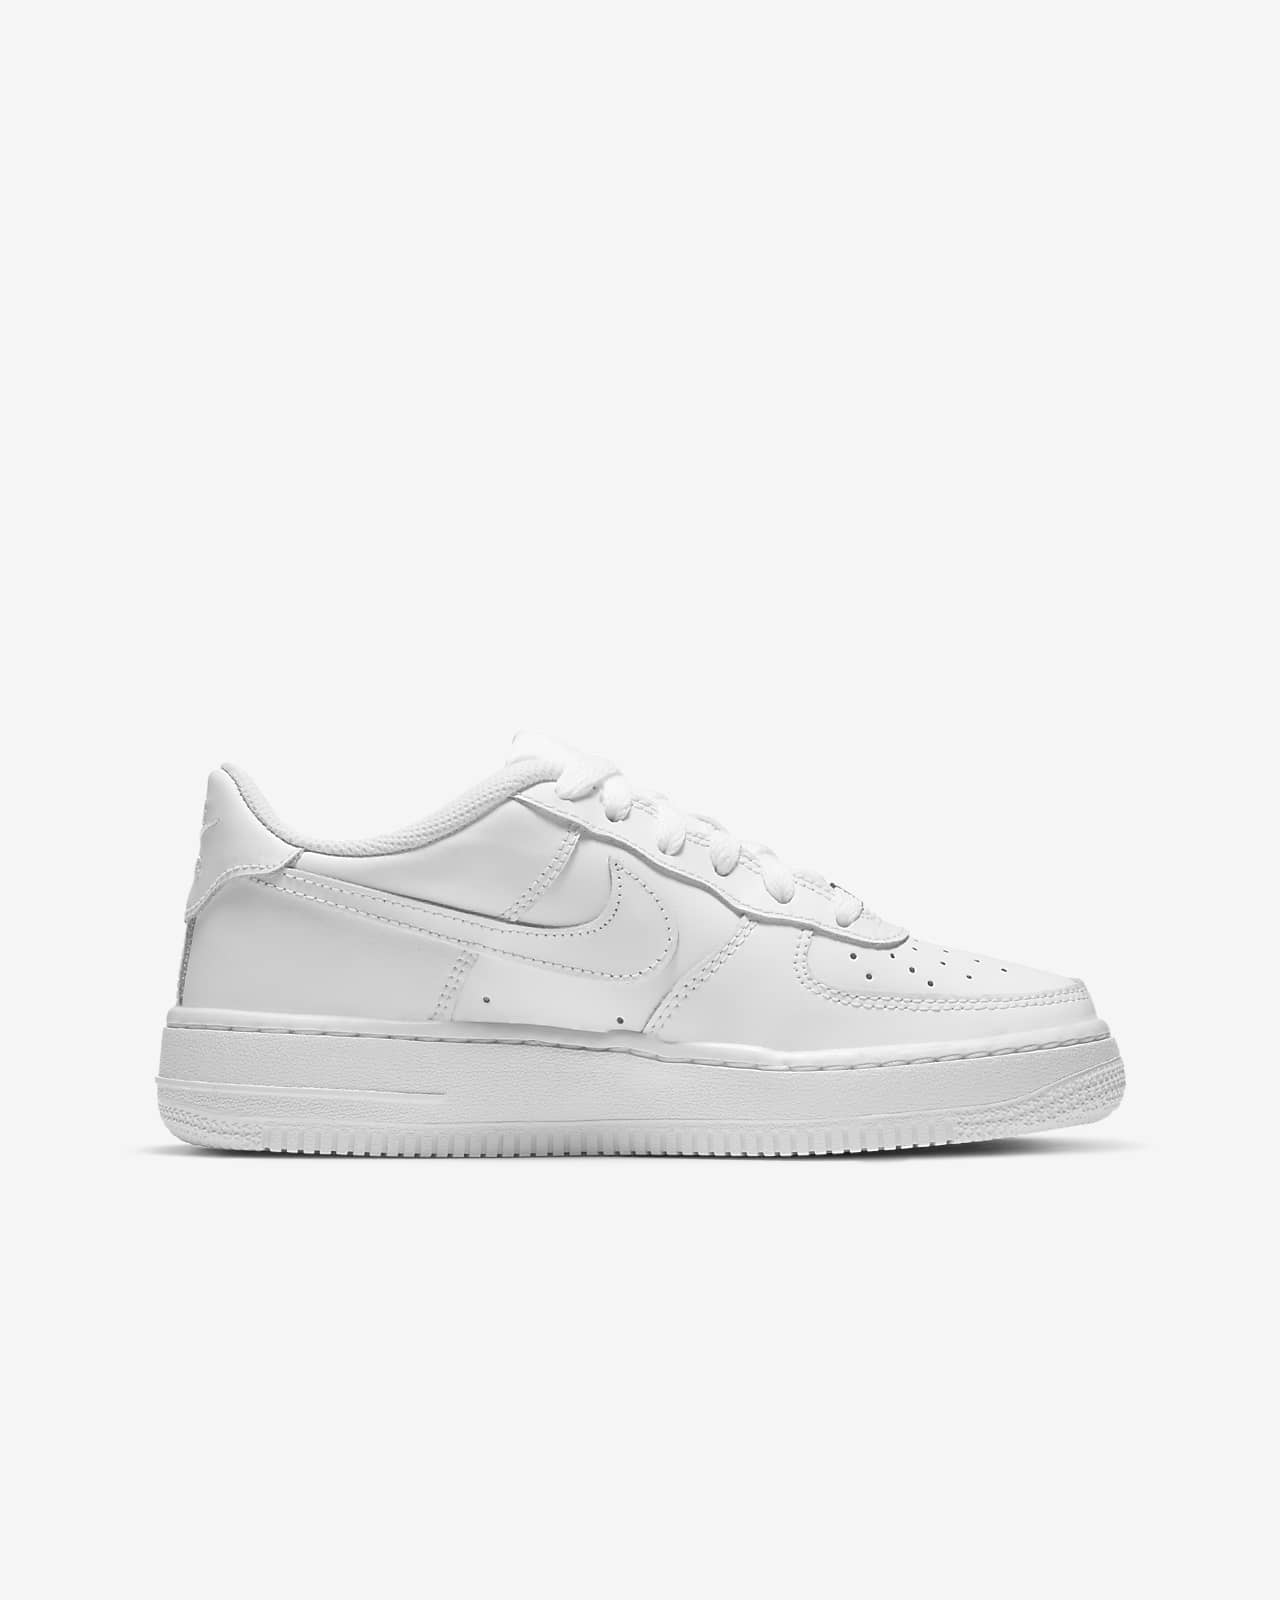 nike air force 1 white size 2.5